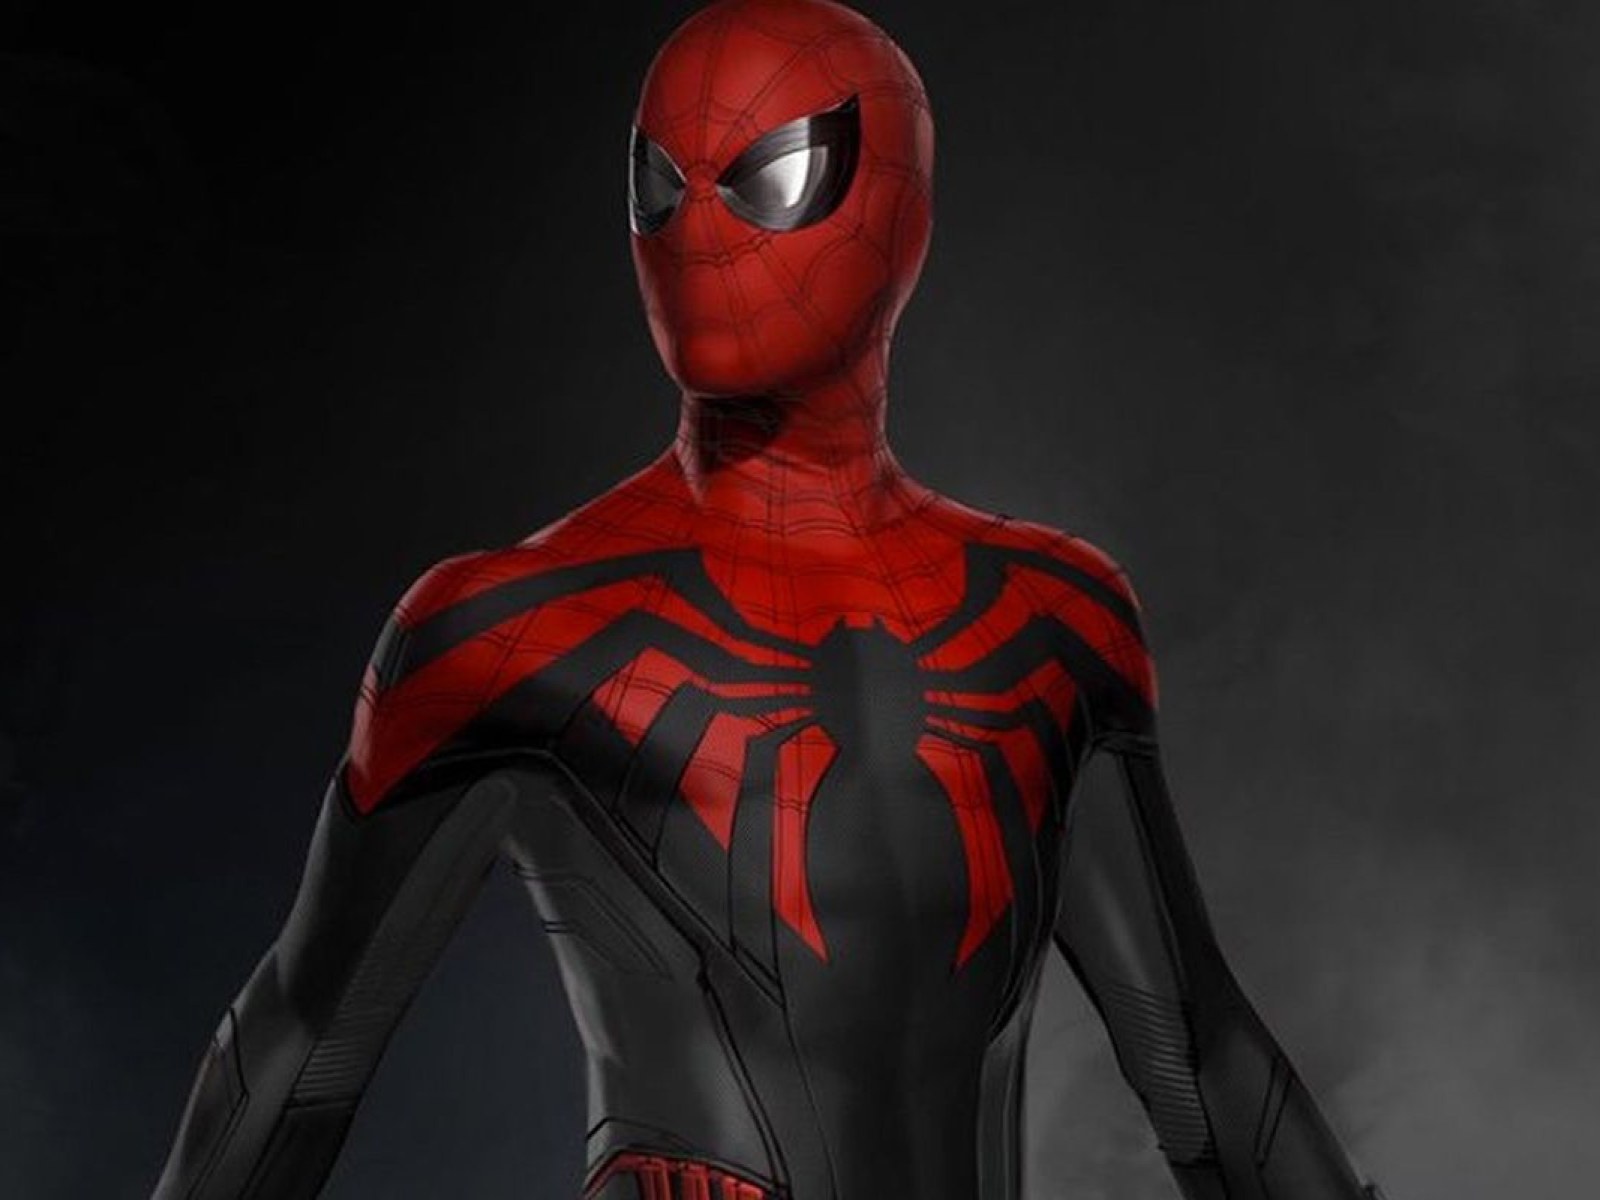 Spider-Man: Far from Home' Will End Phase 3 of Marvel Cinematic Universe,  Not Begin Phase 4, Says Marvel's Kevin Feige